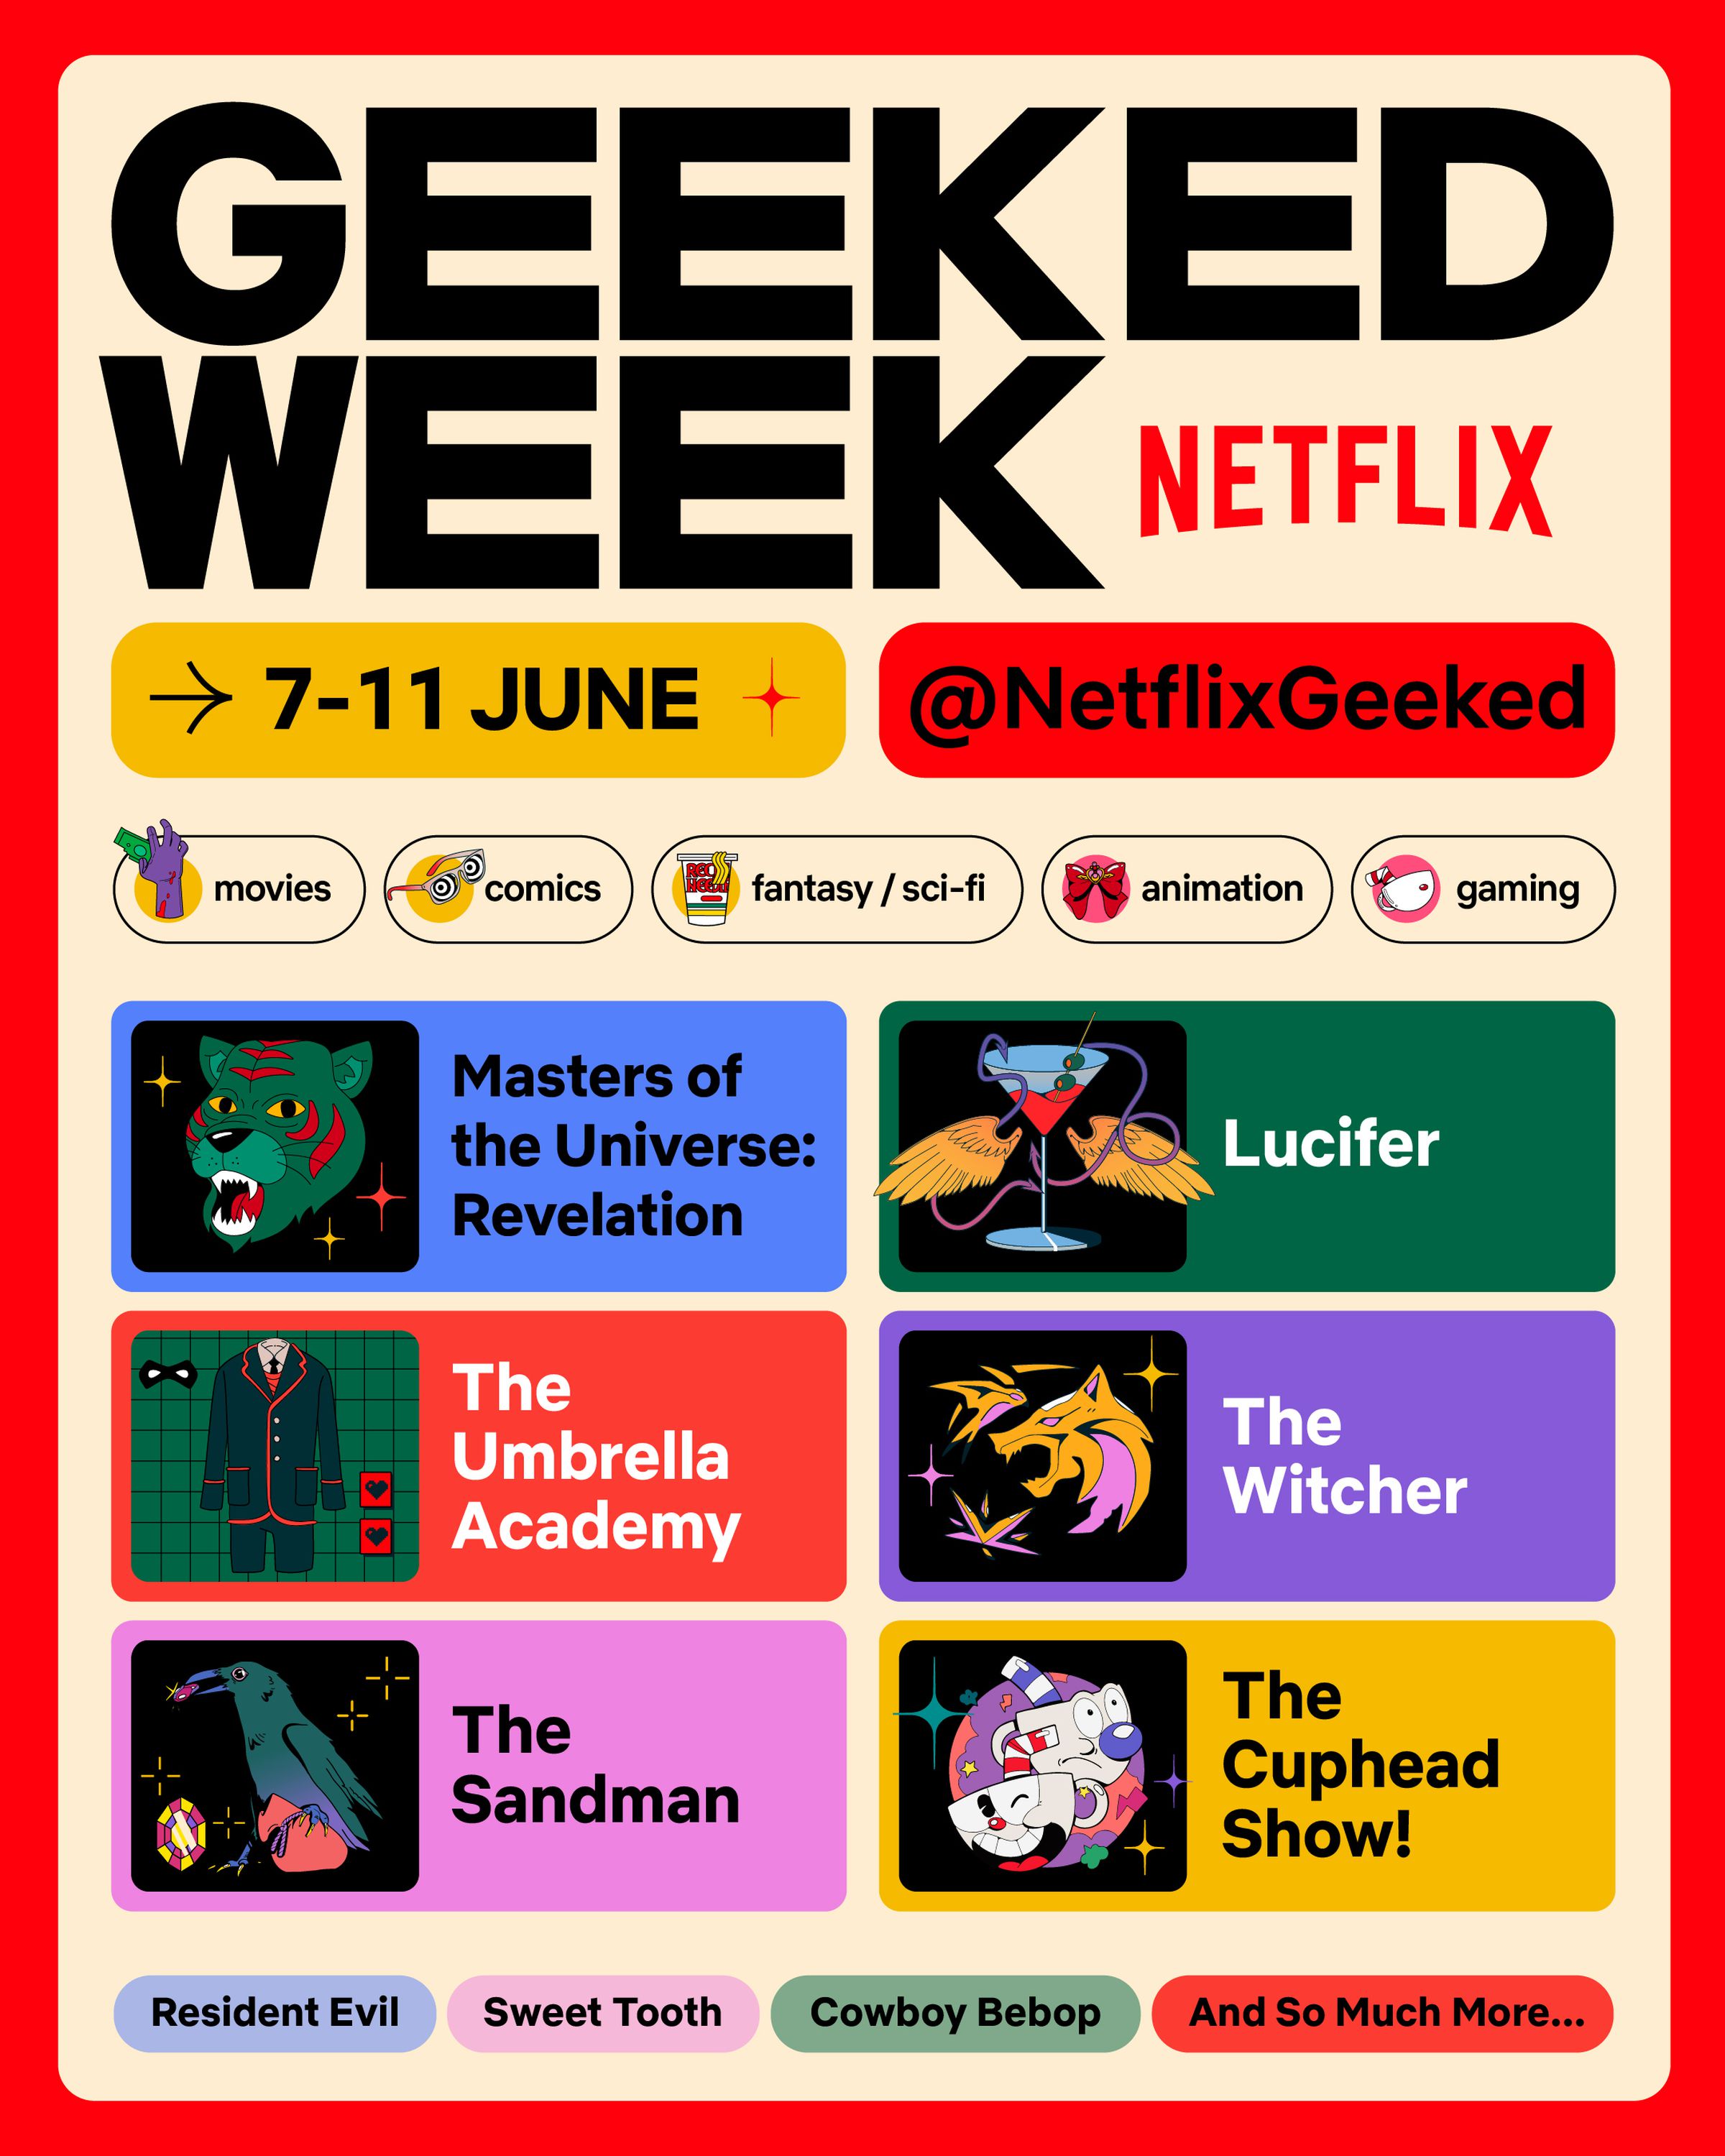 Netflix’s poster for Geeked Week